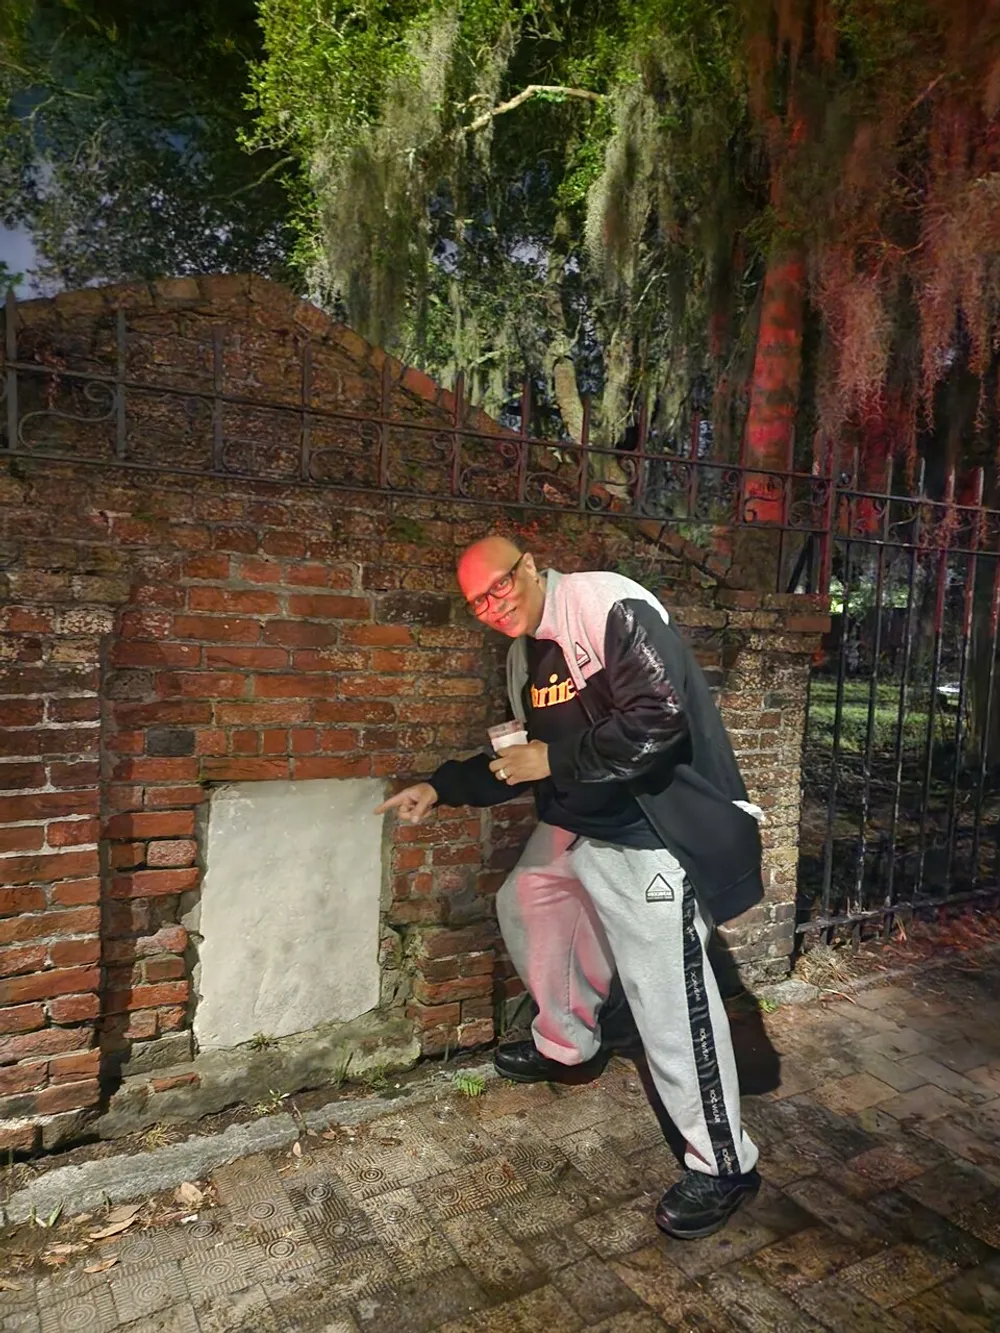 A person wearing glasses casual clothes and a cap is pointing at a bricked-up section in a wall while holding a beverage in the other hand against a backdrop of Spanish moss-draped trees and iron fence in what looks like an evening setting